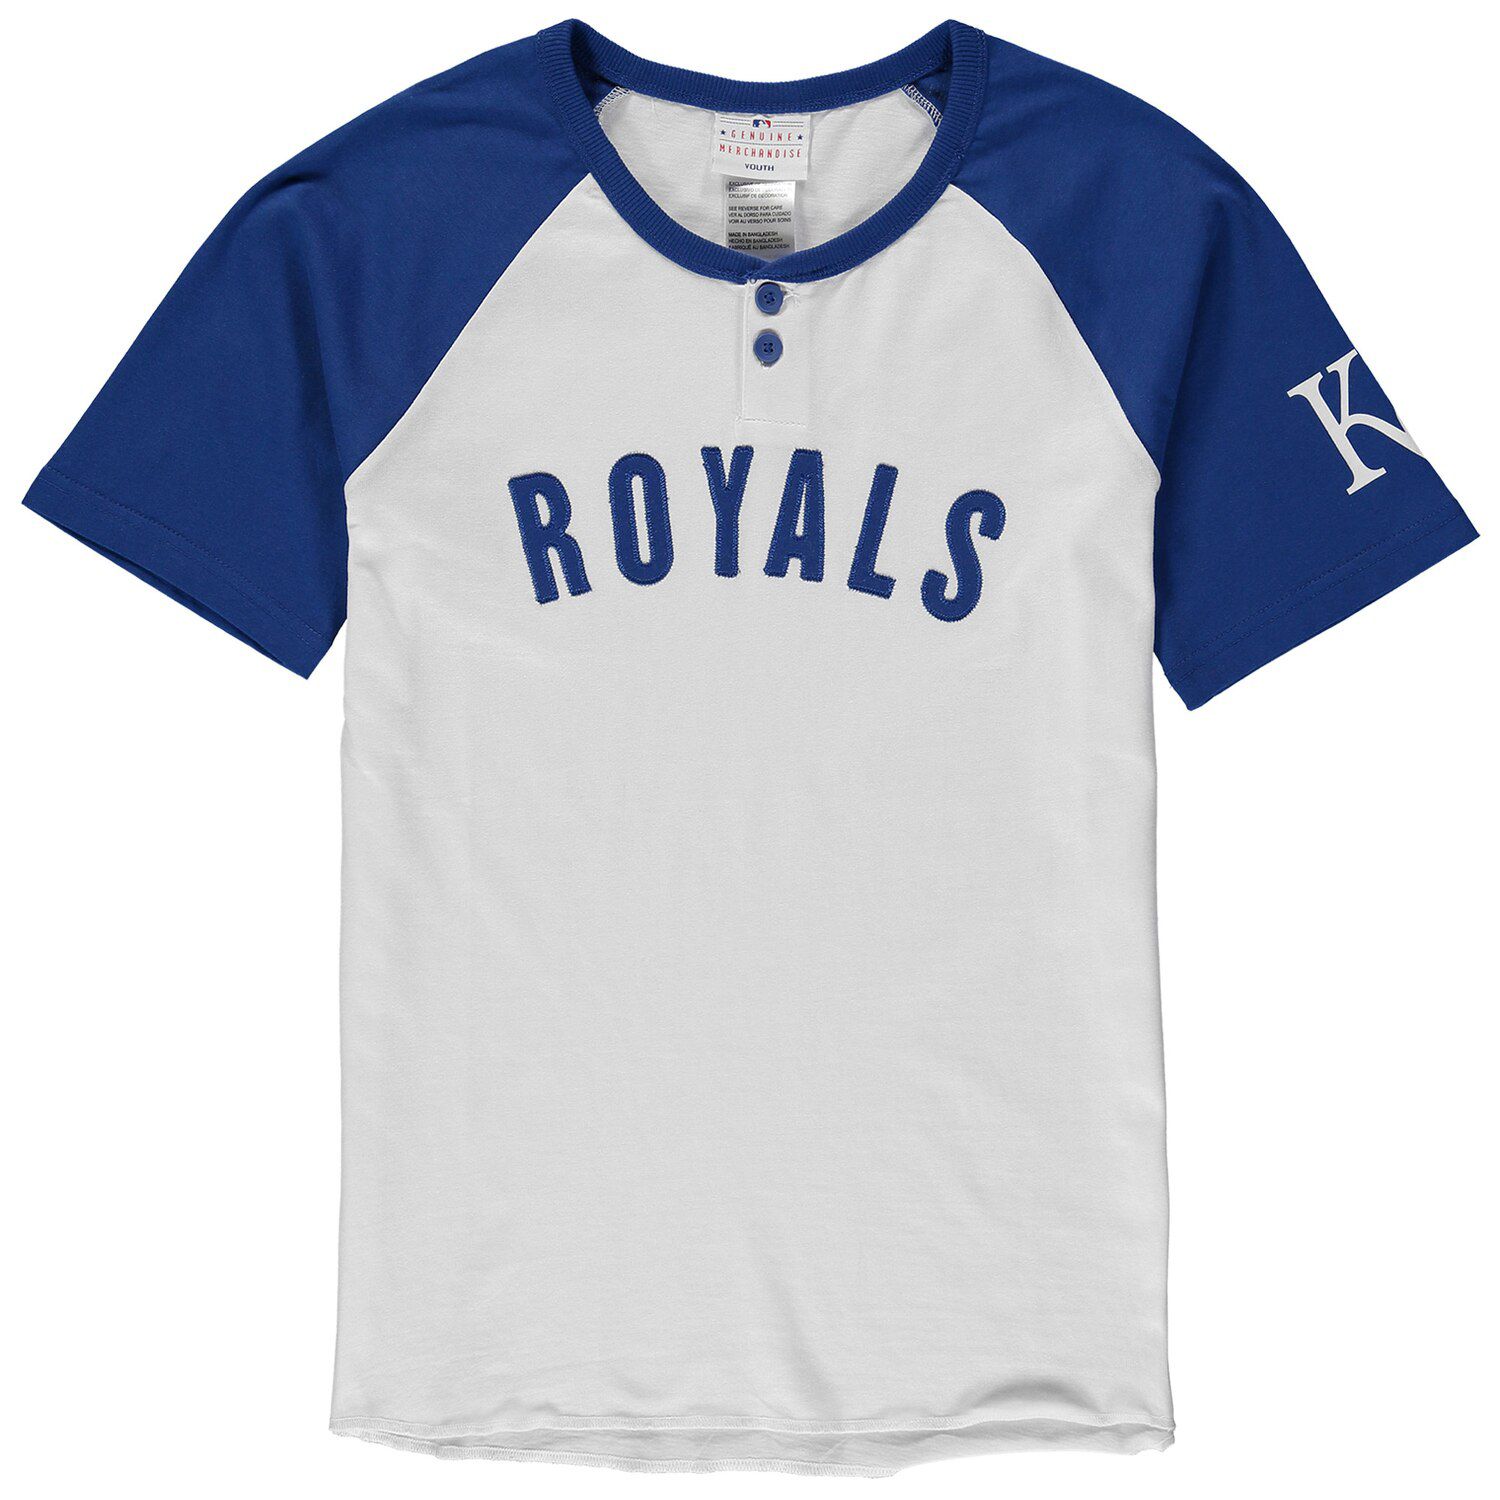 royals opening day jersey